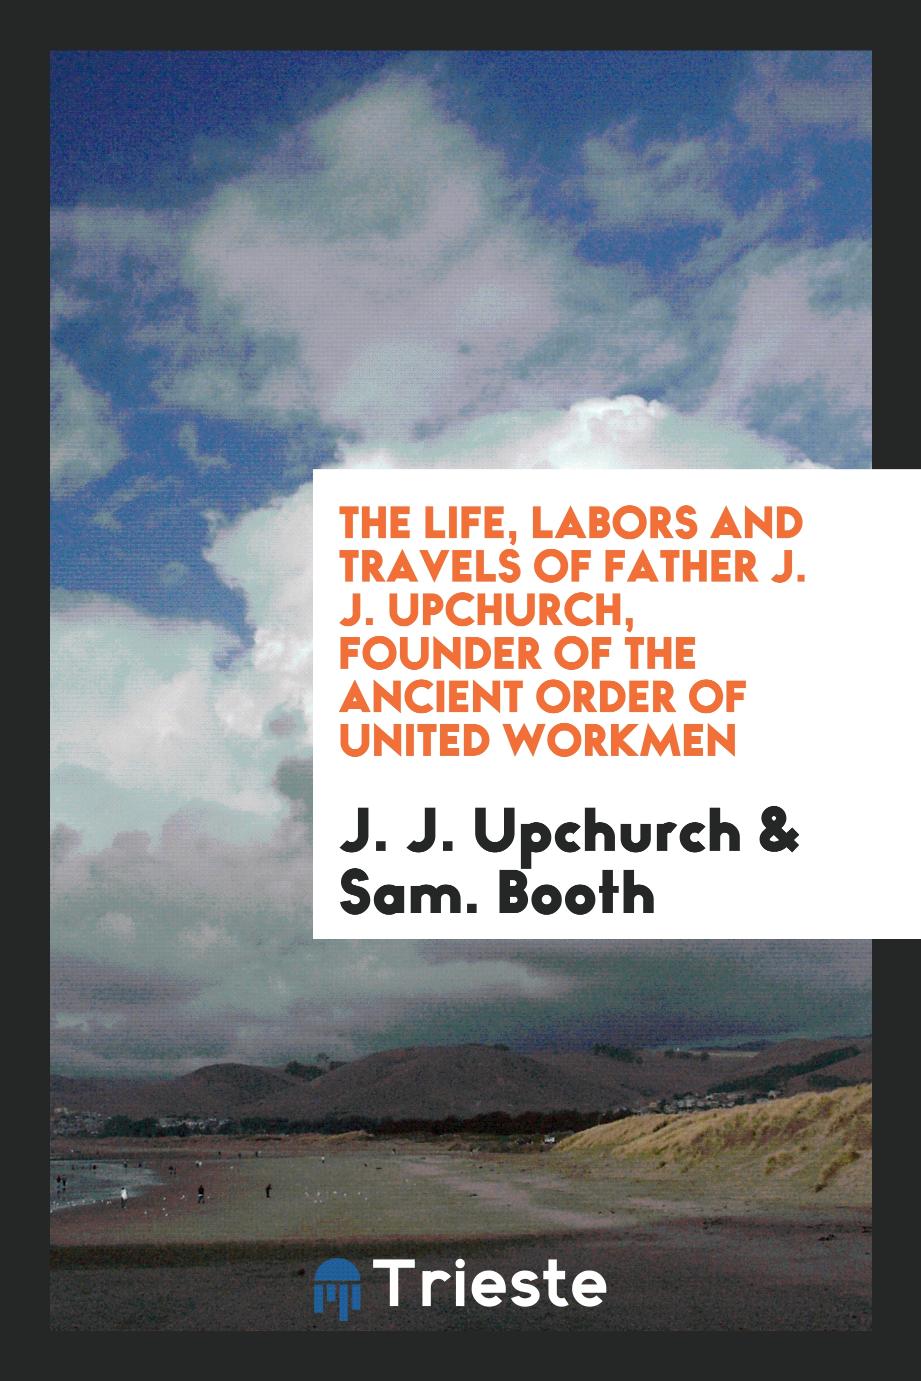 The life, labors and travels of Father J. J. Upchurch, founder of the Ancient Order of United Workmen